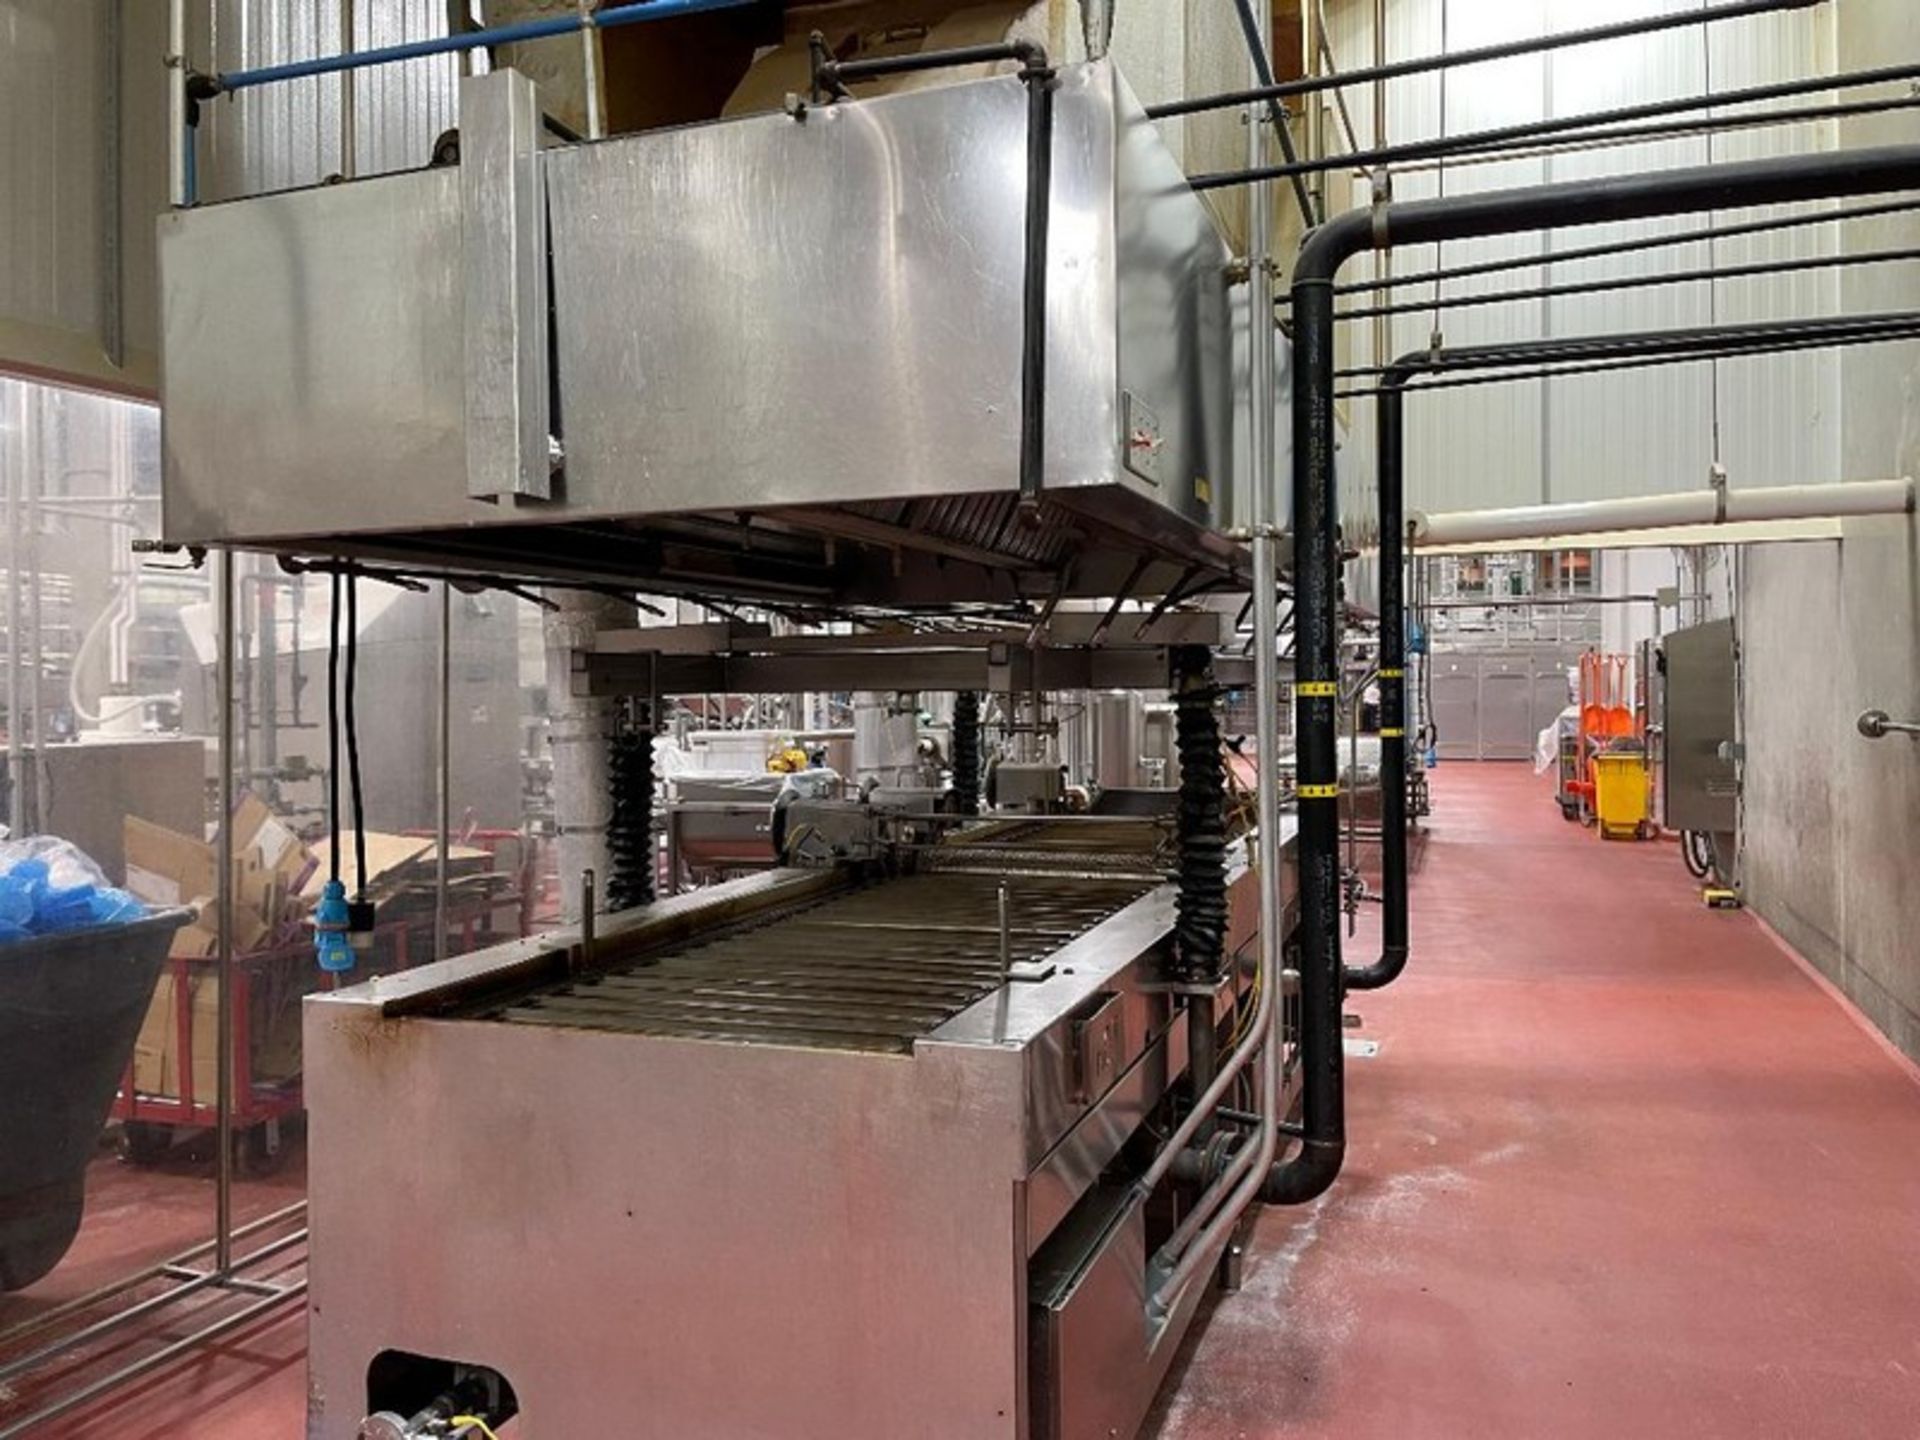 DCA S/S Doughnut Fryer, System was Completely Rebuilt in 2004 by Topos Mondil, Aprox. 40" Wide x